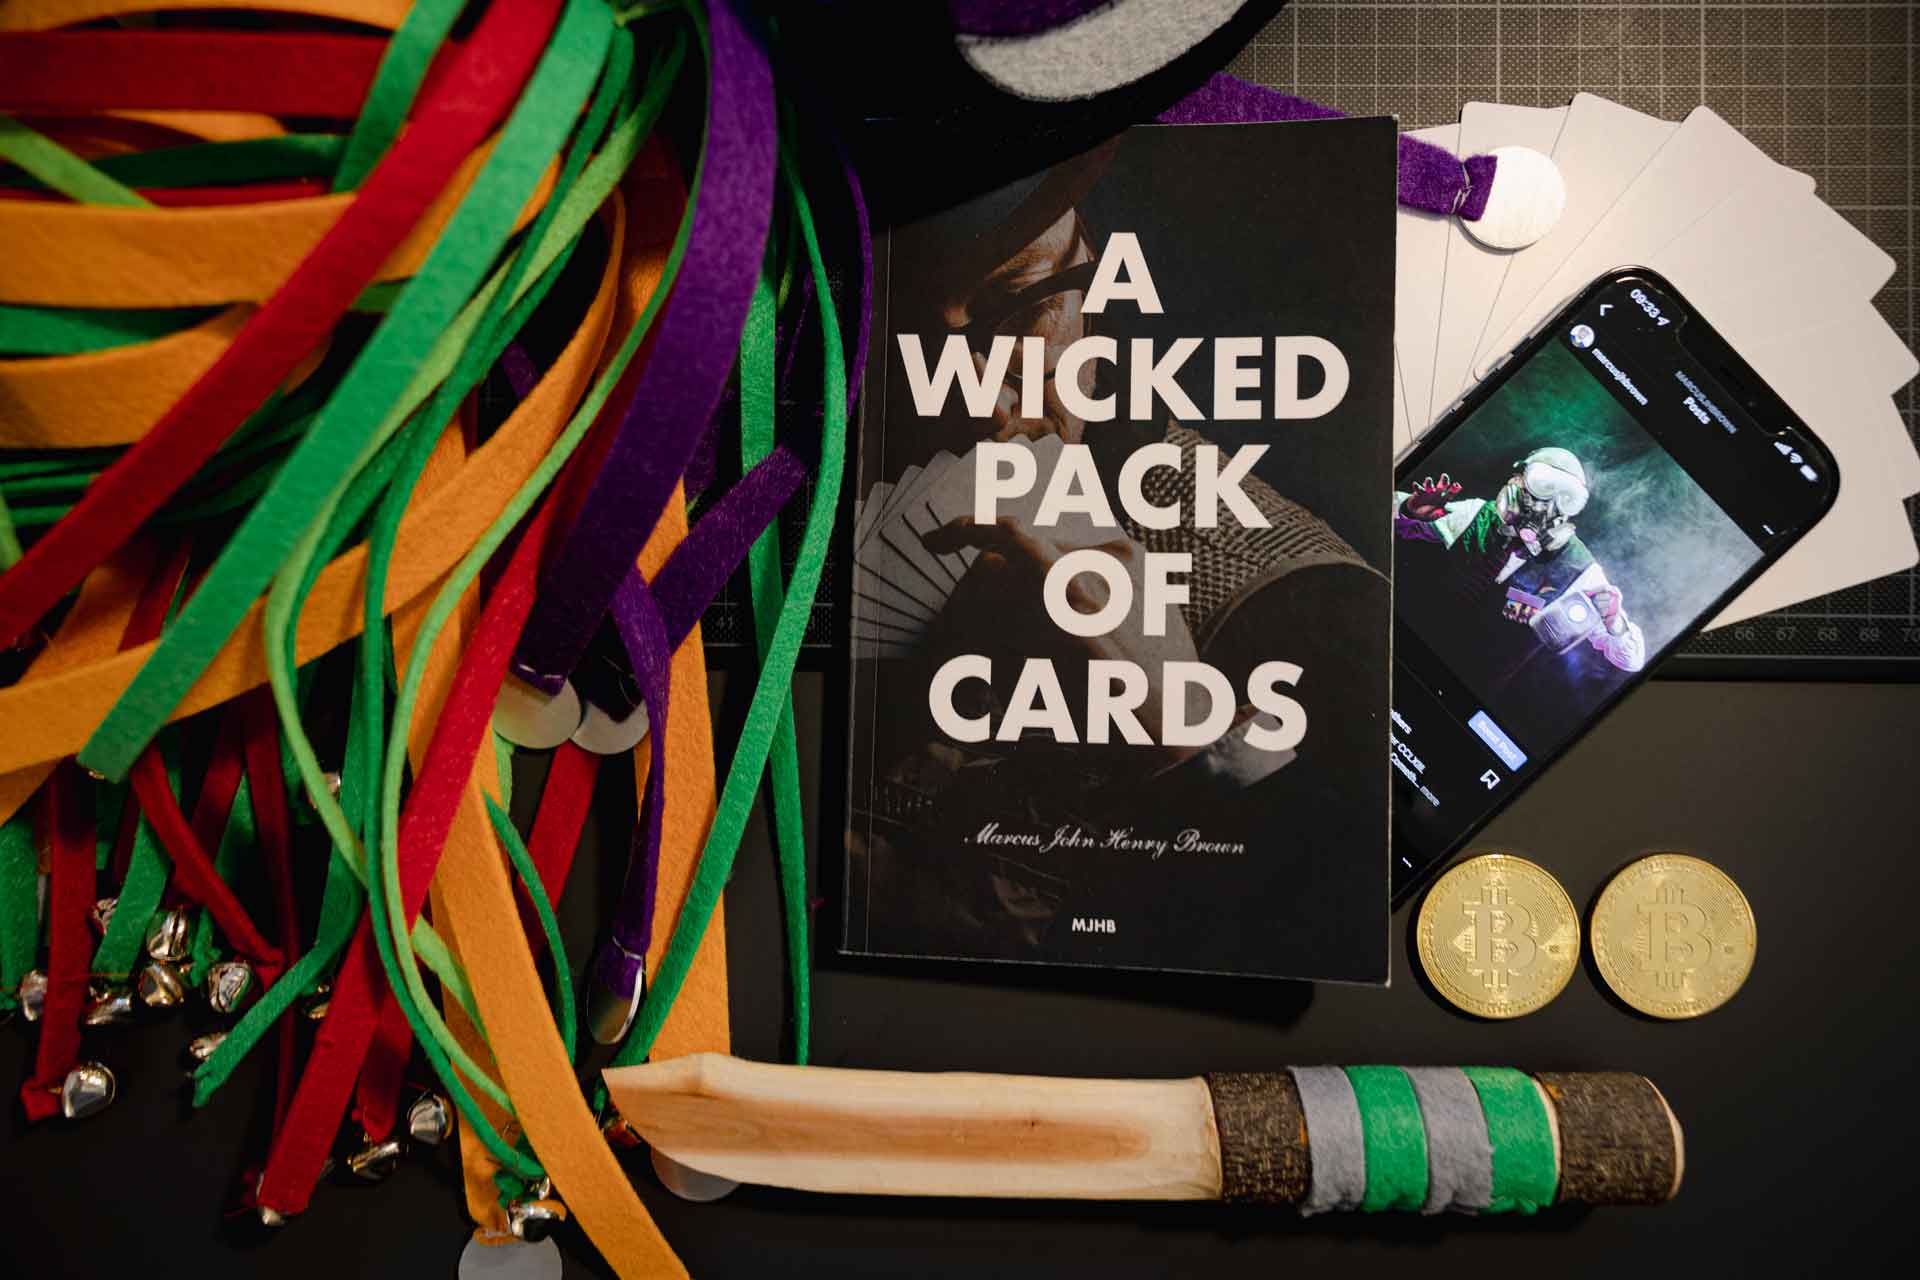 A Wicked Pack Of Cards a book of unusual business spells